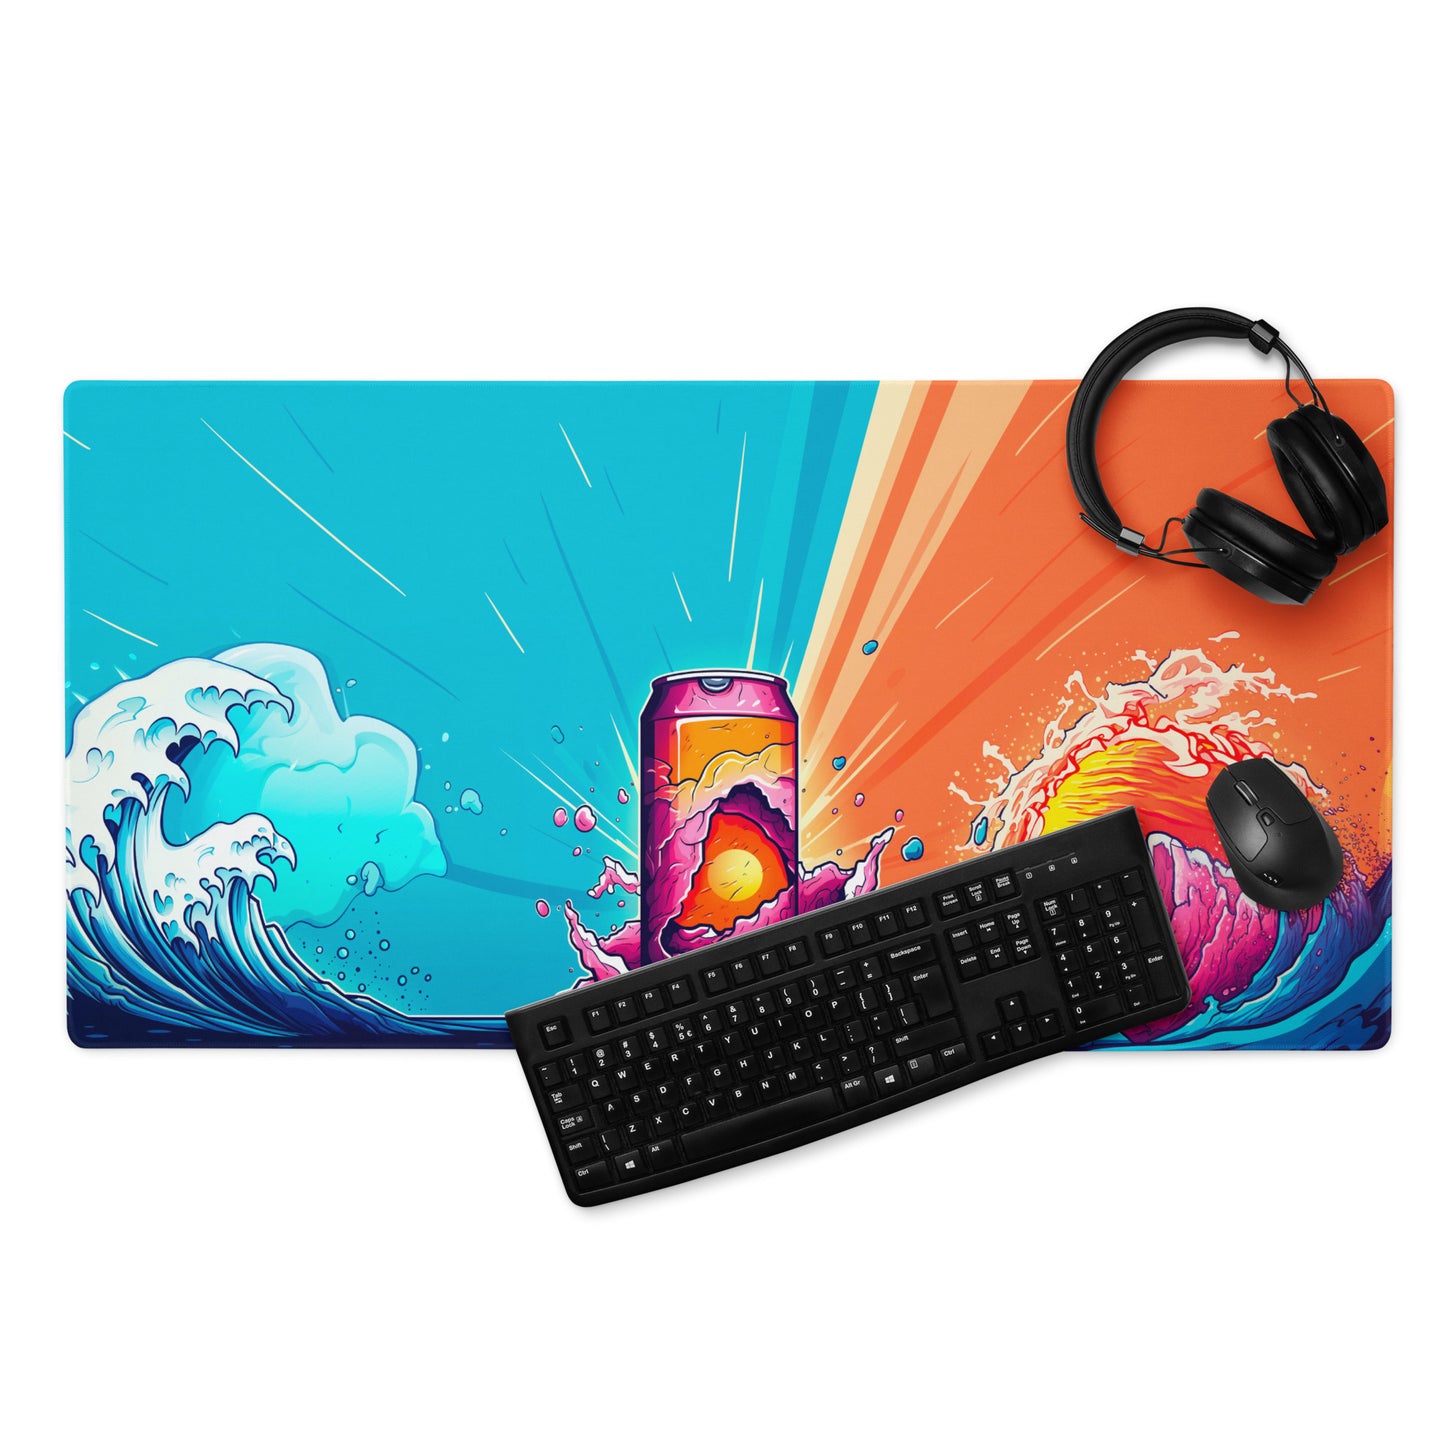 A 36" x 18" blue and orange desk pad with a soda can in the middle . With a keyboard, mouse, and headphones sitting on it.